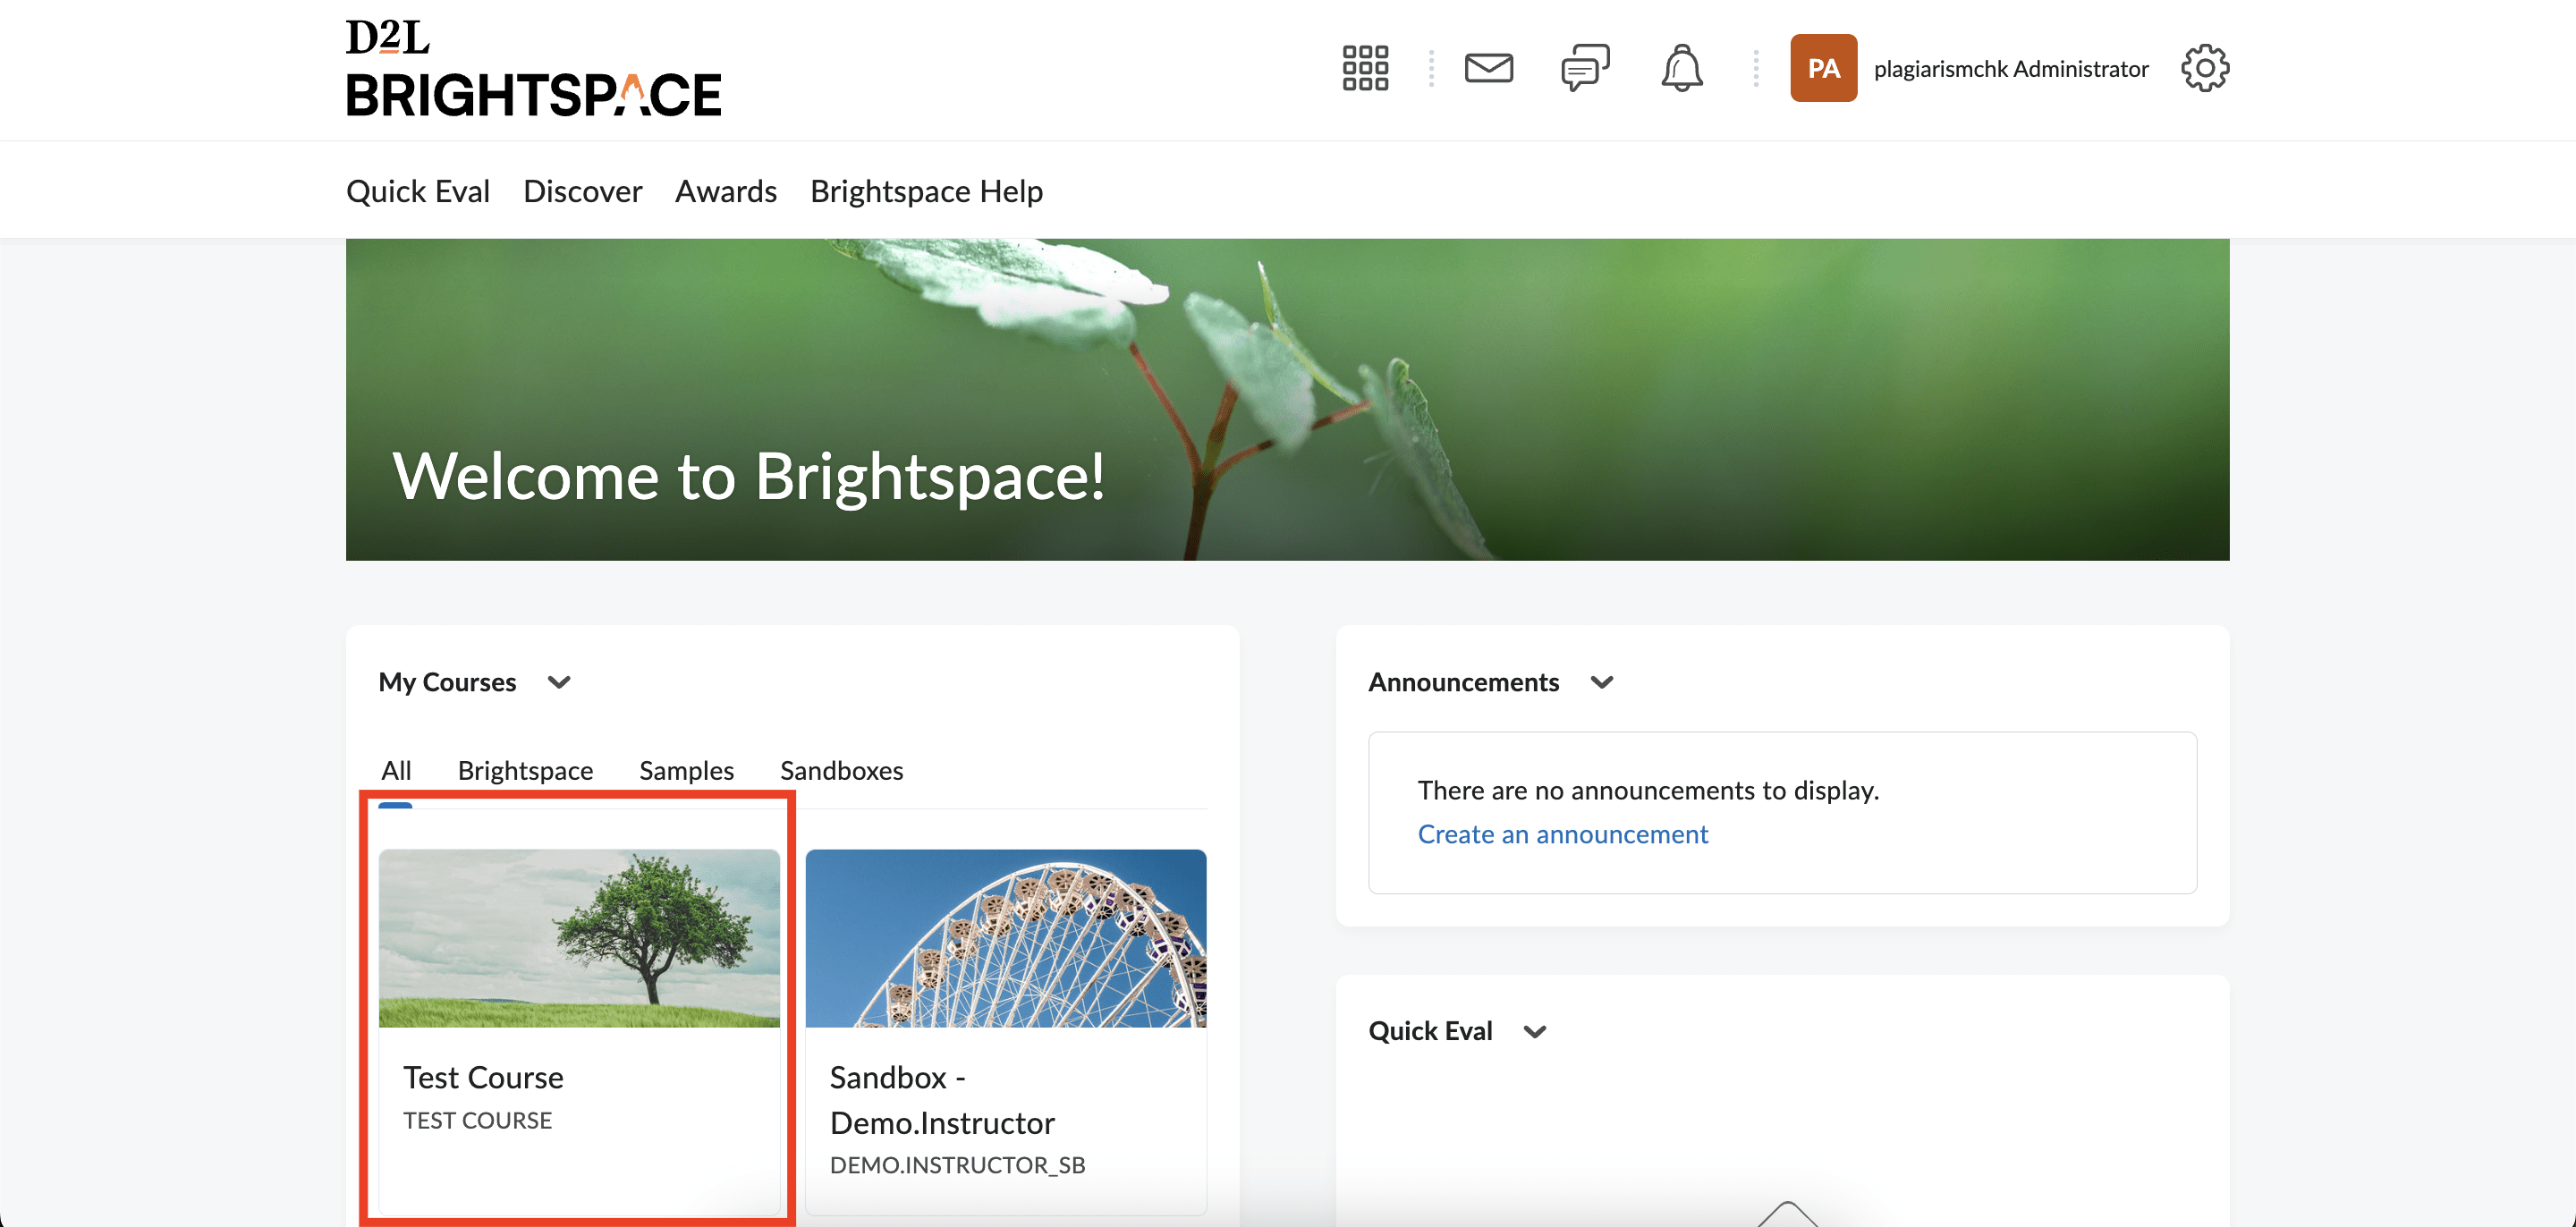 How to use PlagiarismCheck.org on Brightspace